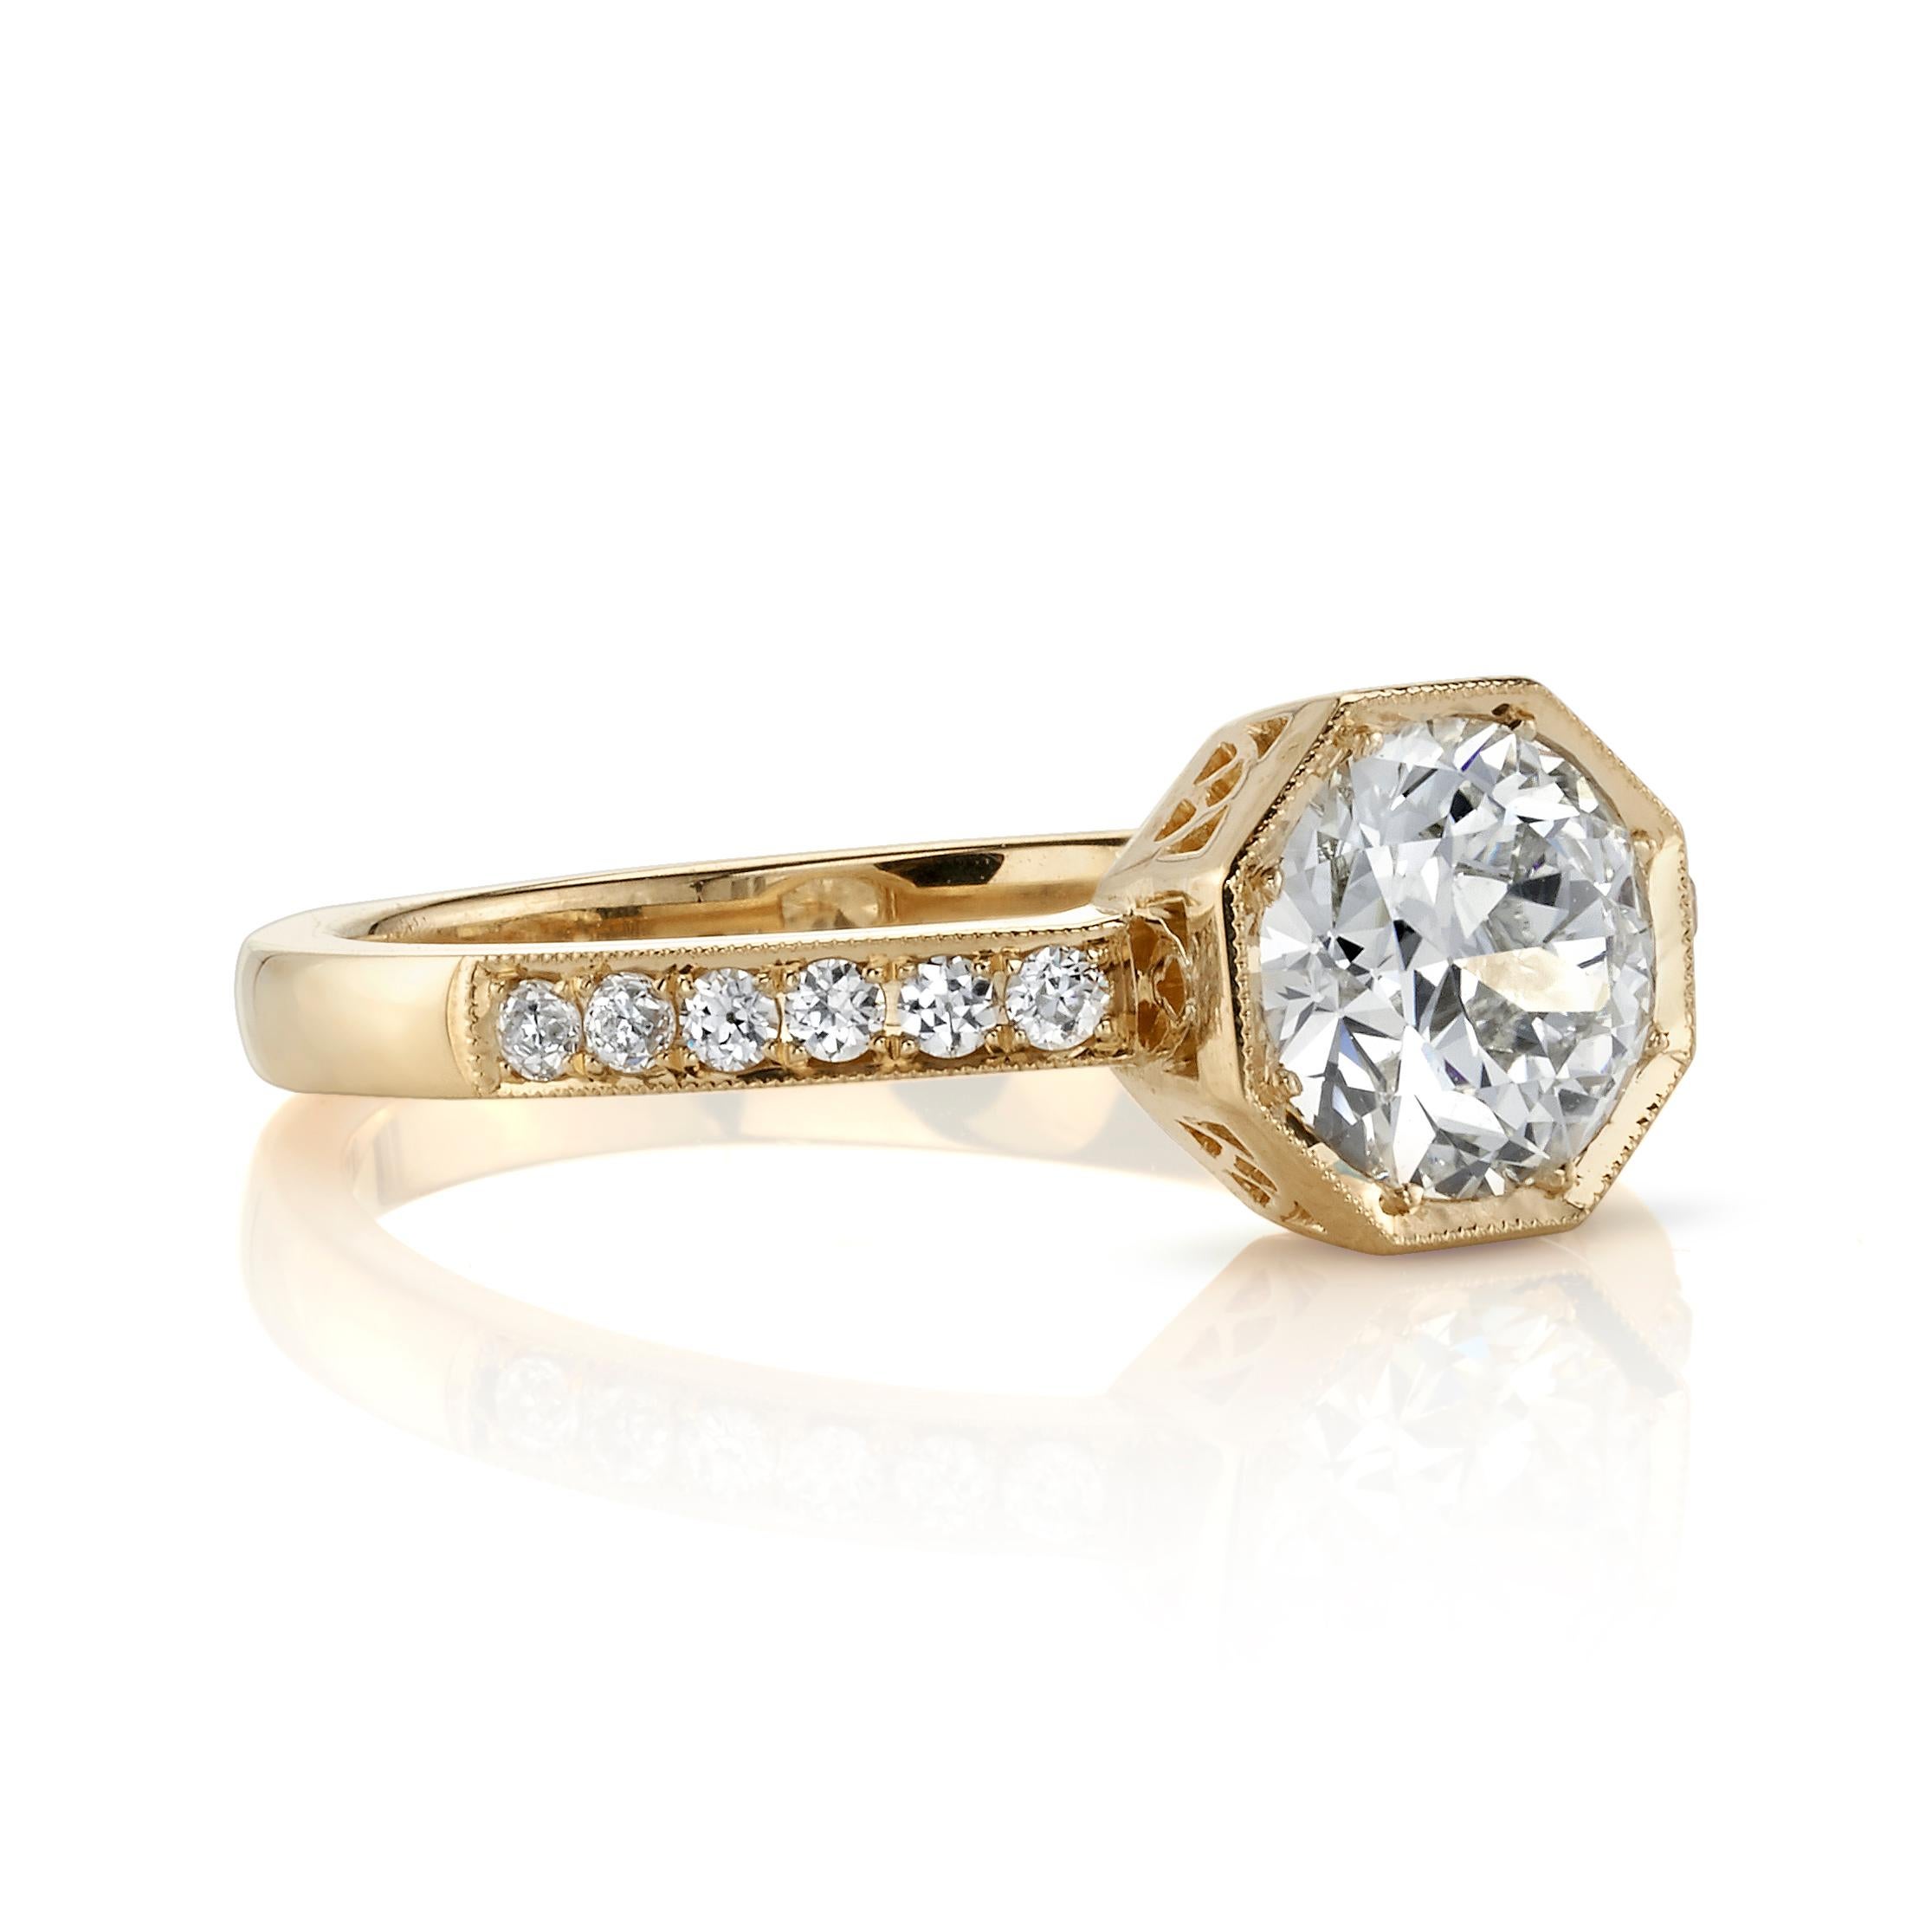 0.92ctw J/VVS2 GIA certified old European cut Diamond set in a handcrafted 18K yellow gold mounting. 0.12ctw old European cut accent diamonds rest on both sides of the upper shank of the ring.

Ring is currently a size 6 and can be sized to fit.